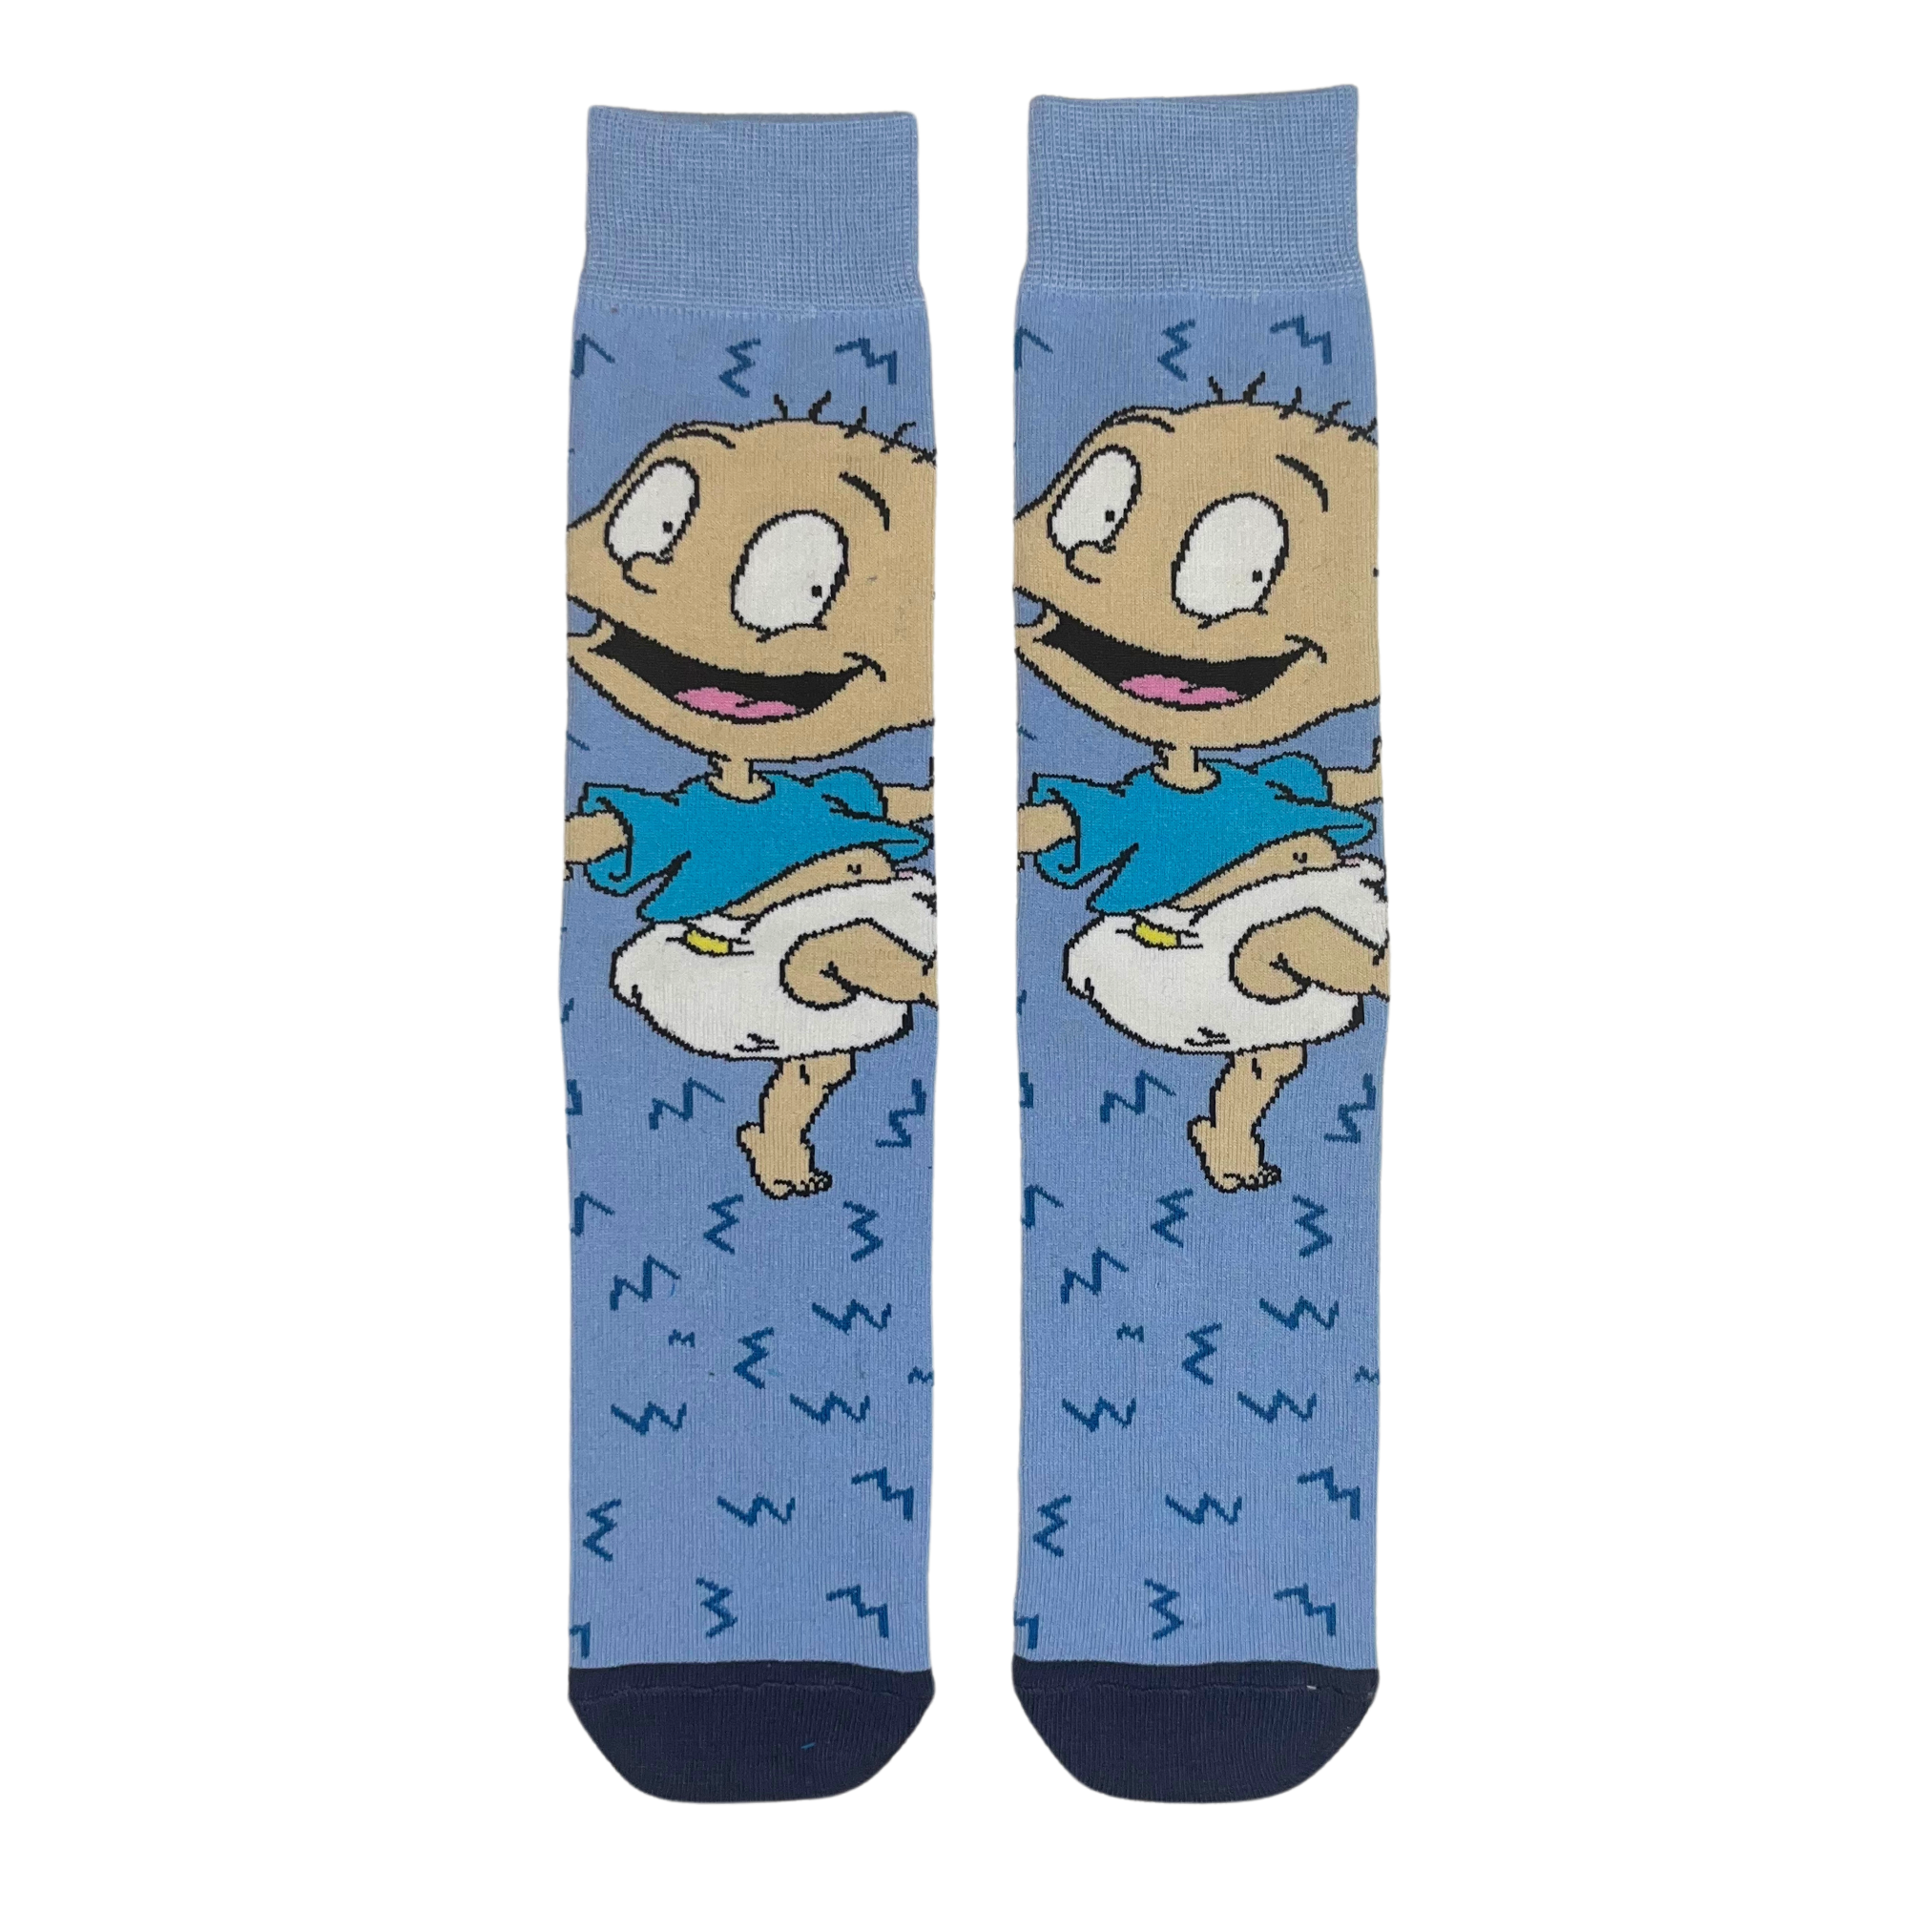 Calcetín Tommy Pickles - Unisex Adulto